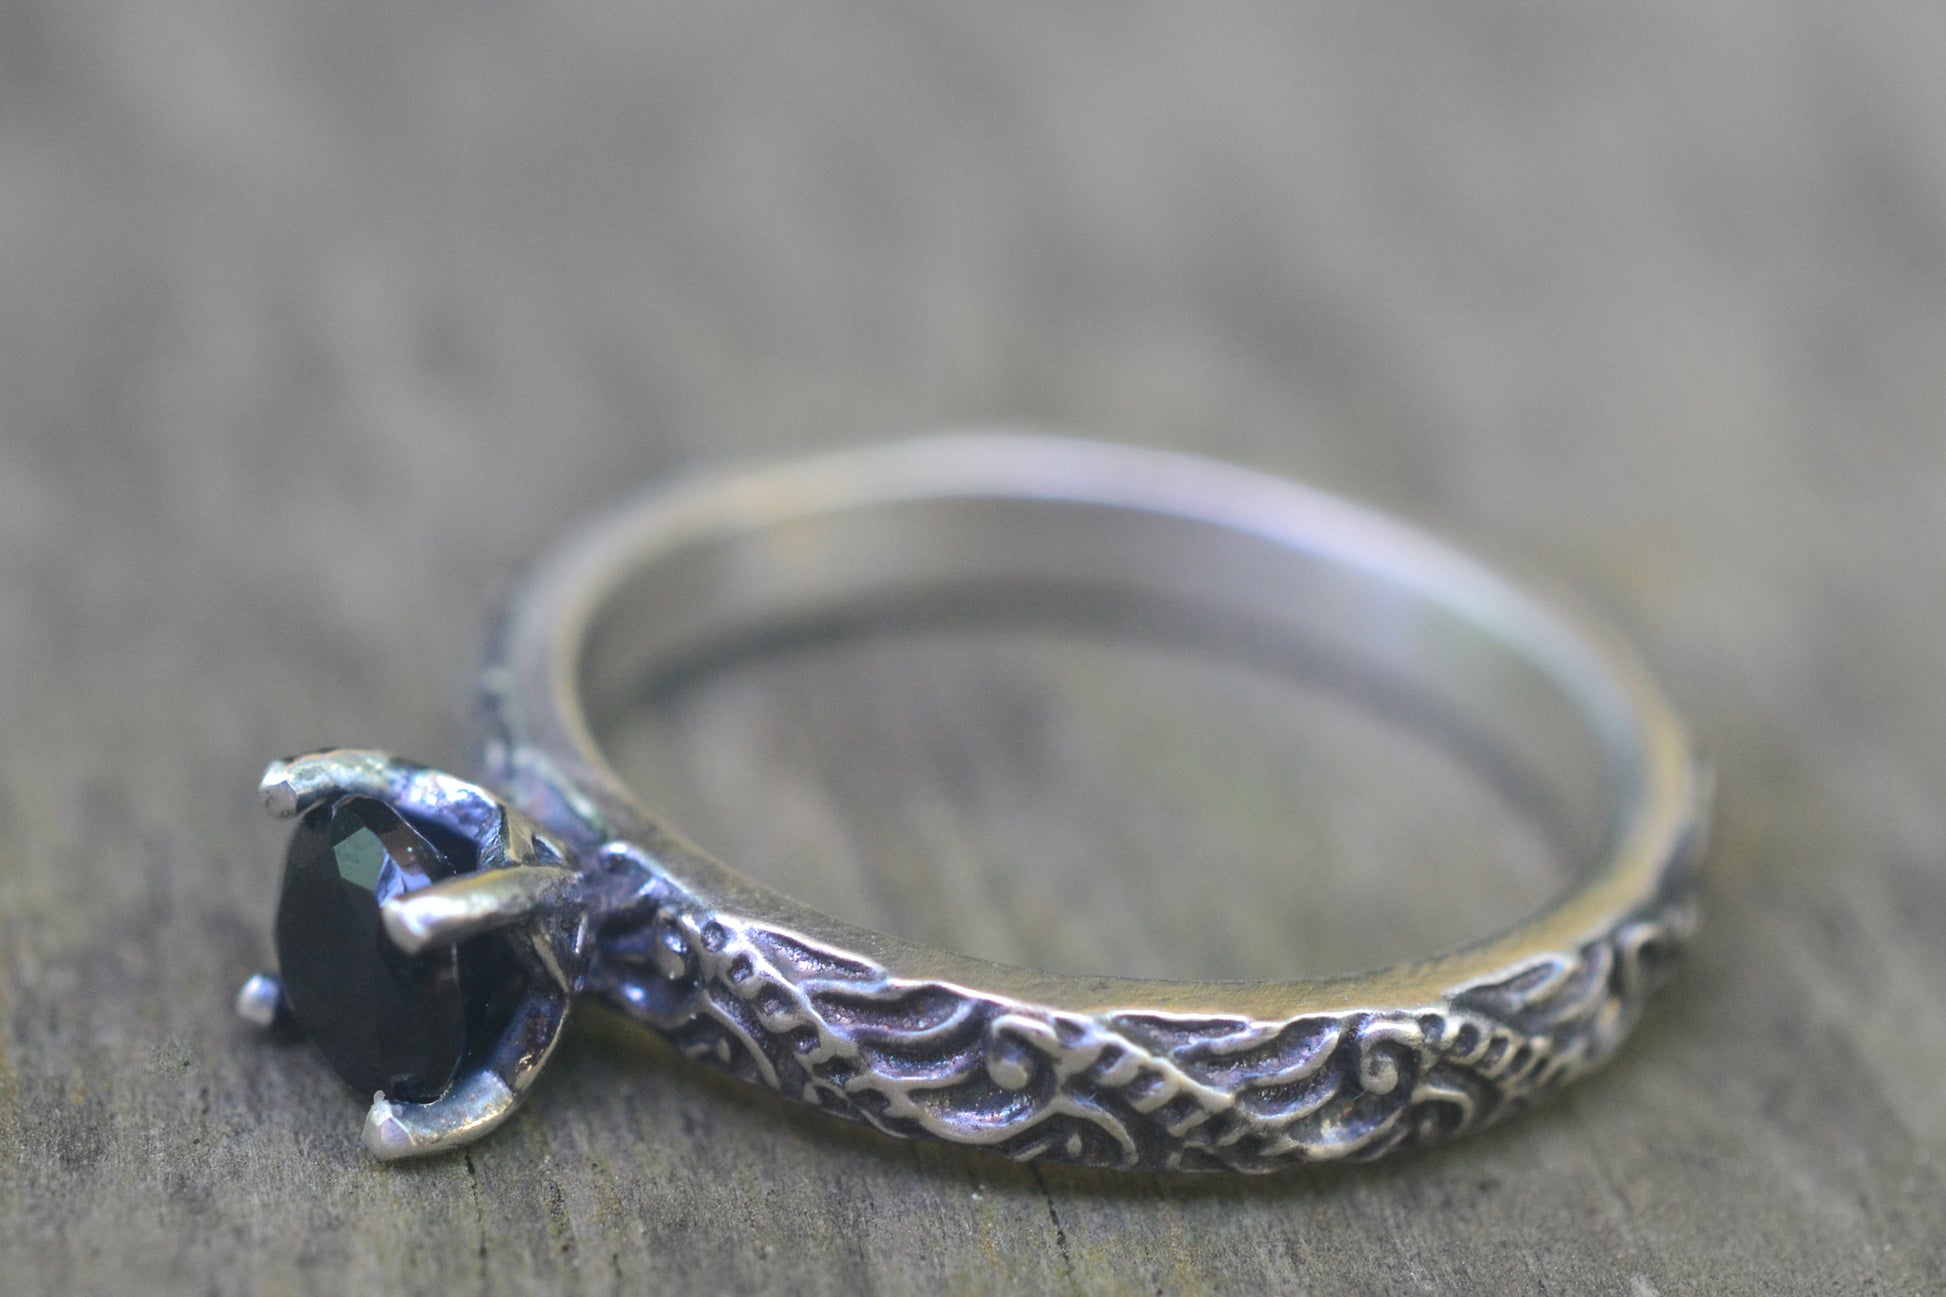 5mm Black Spinel Ring in Oxidised Sterling